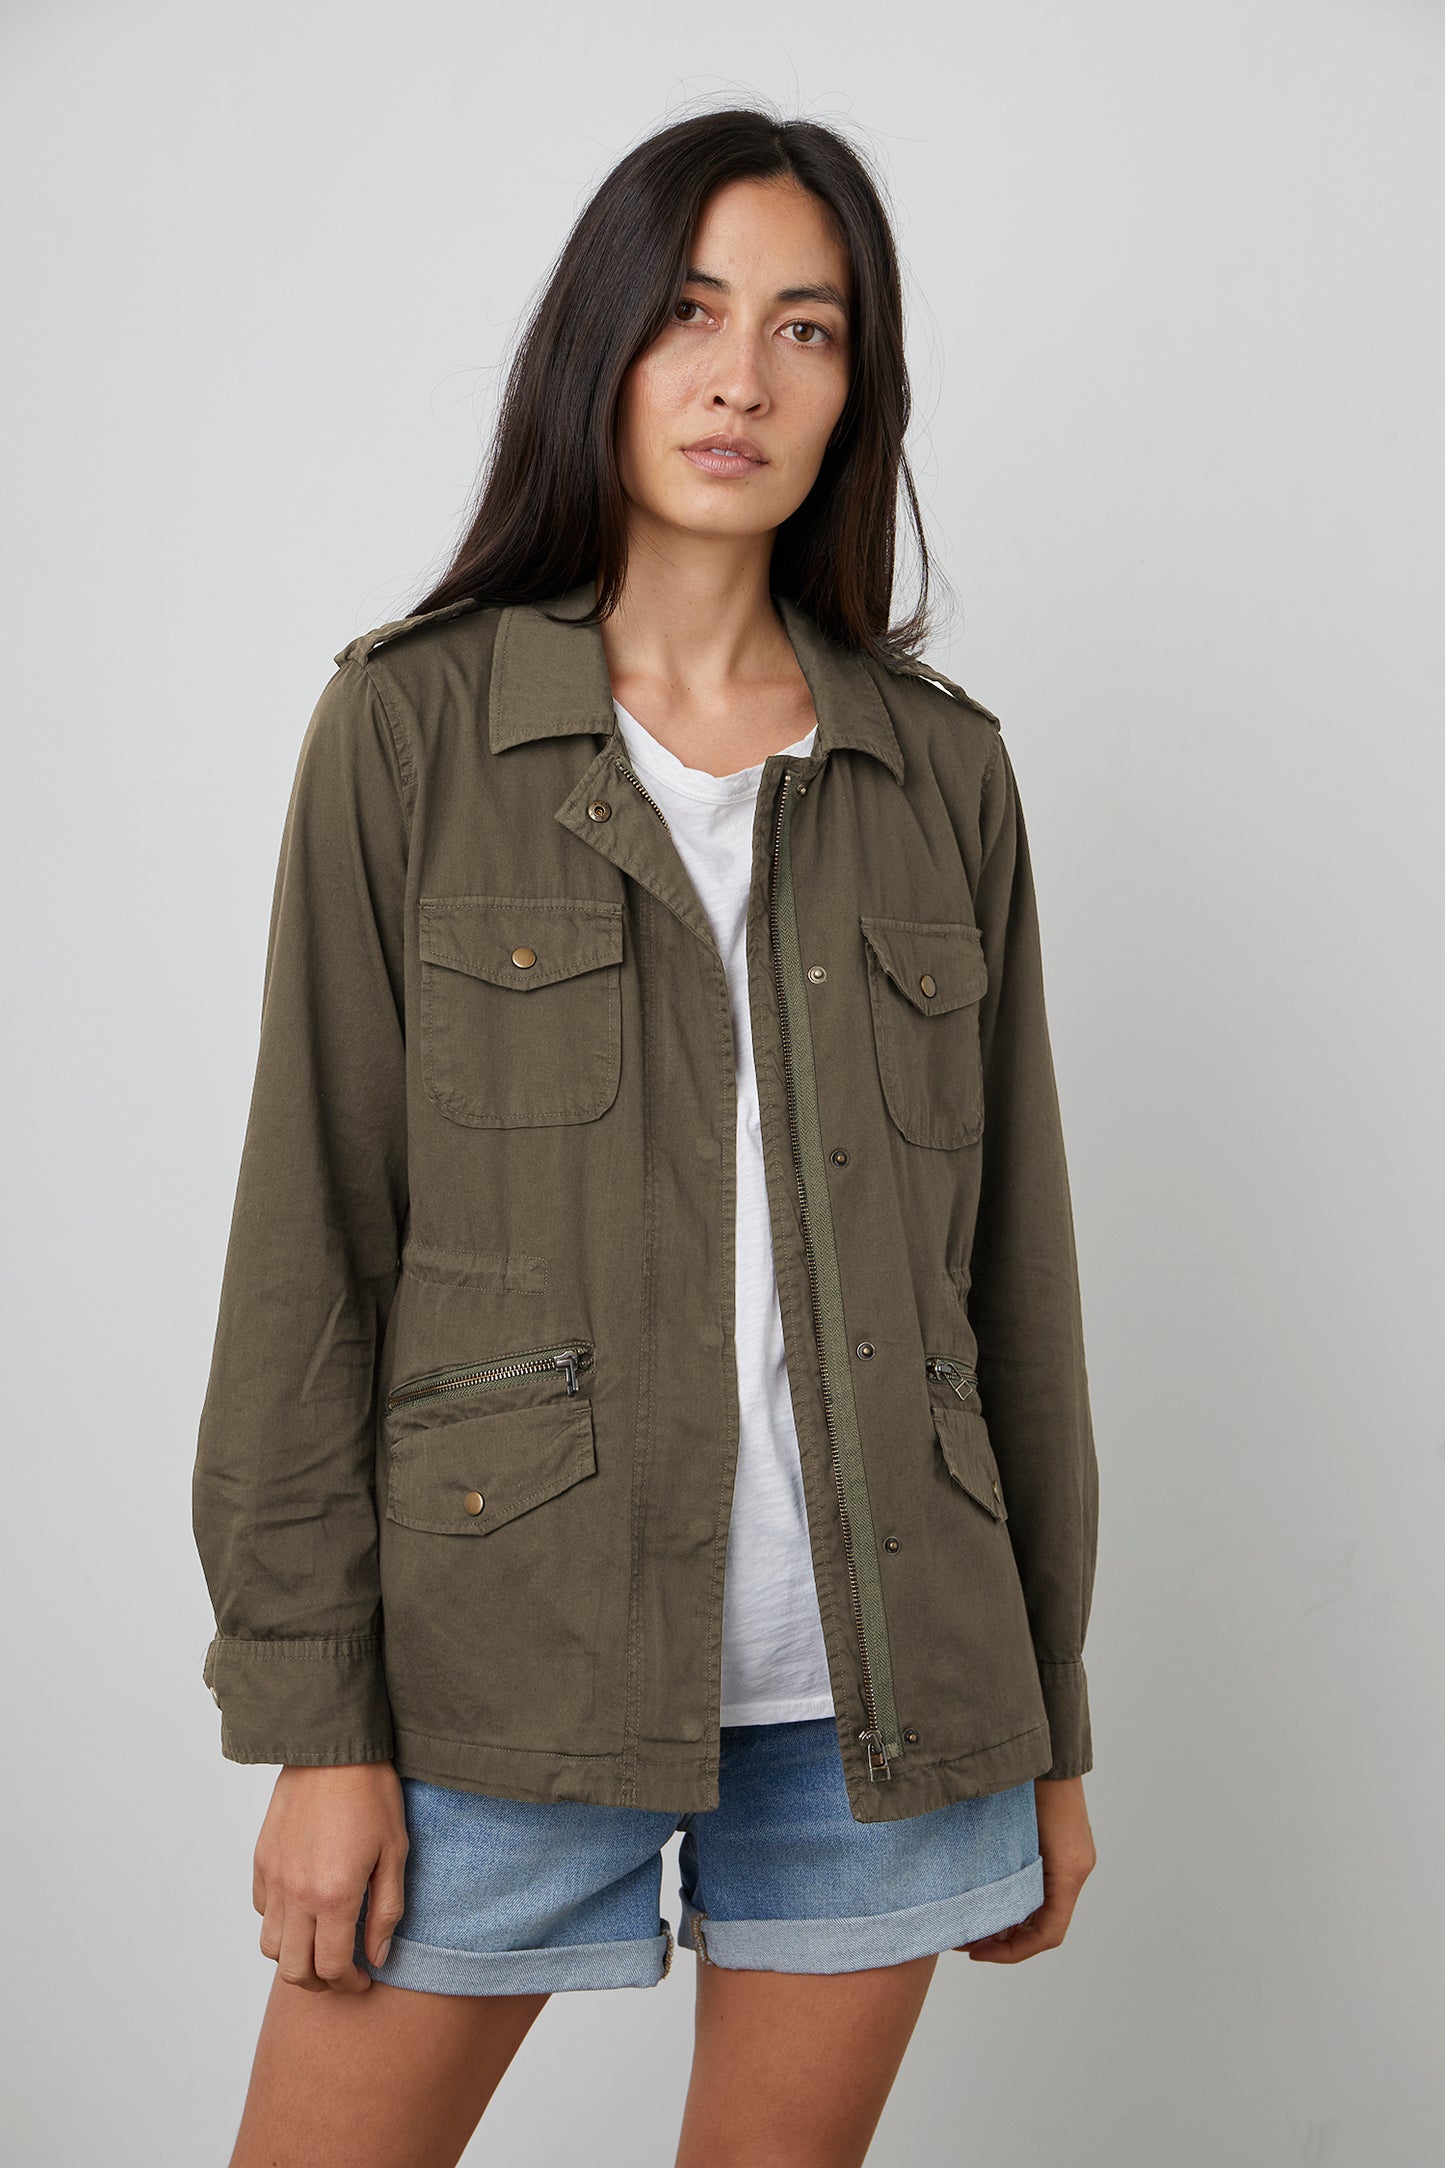 RUBY ARMY JACKET IN FOREST